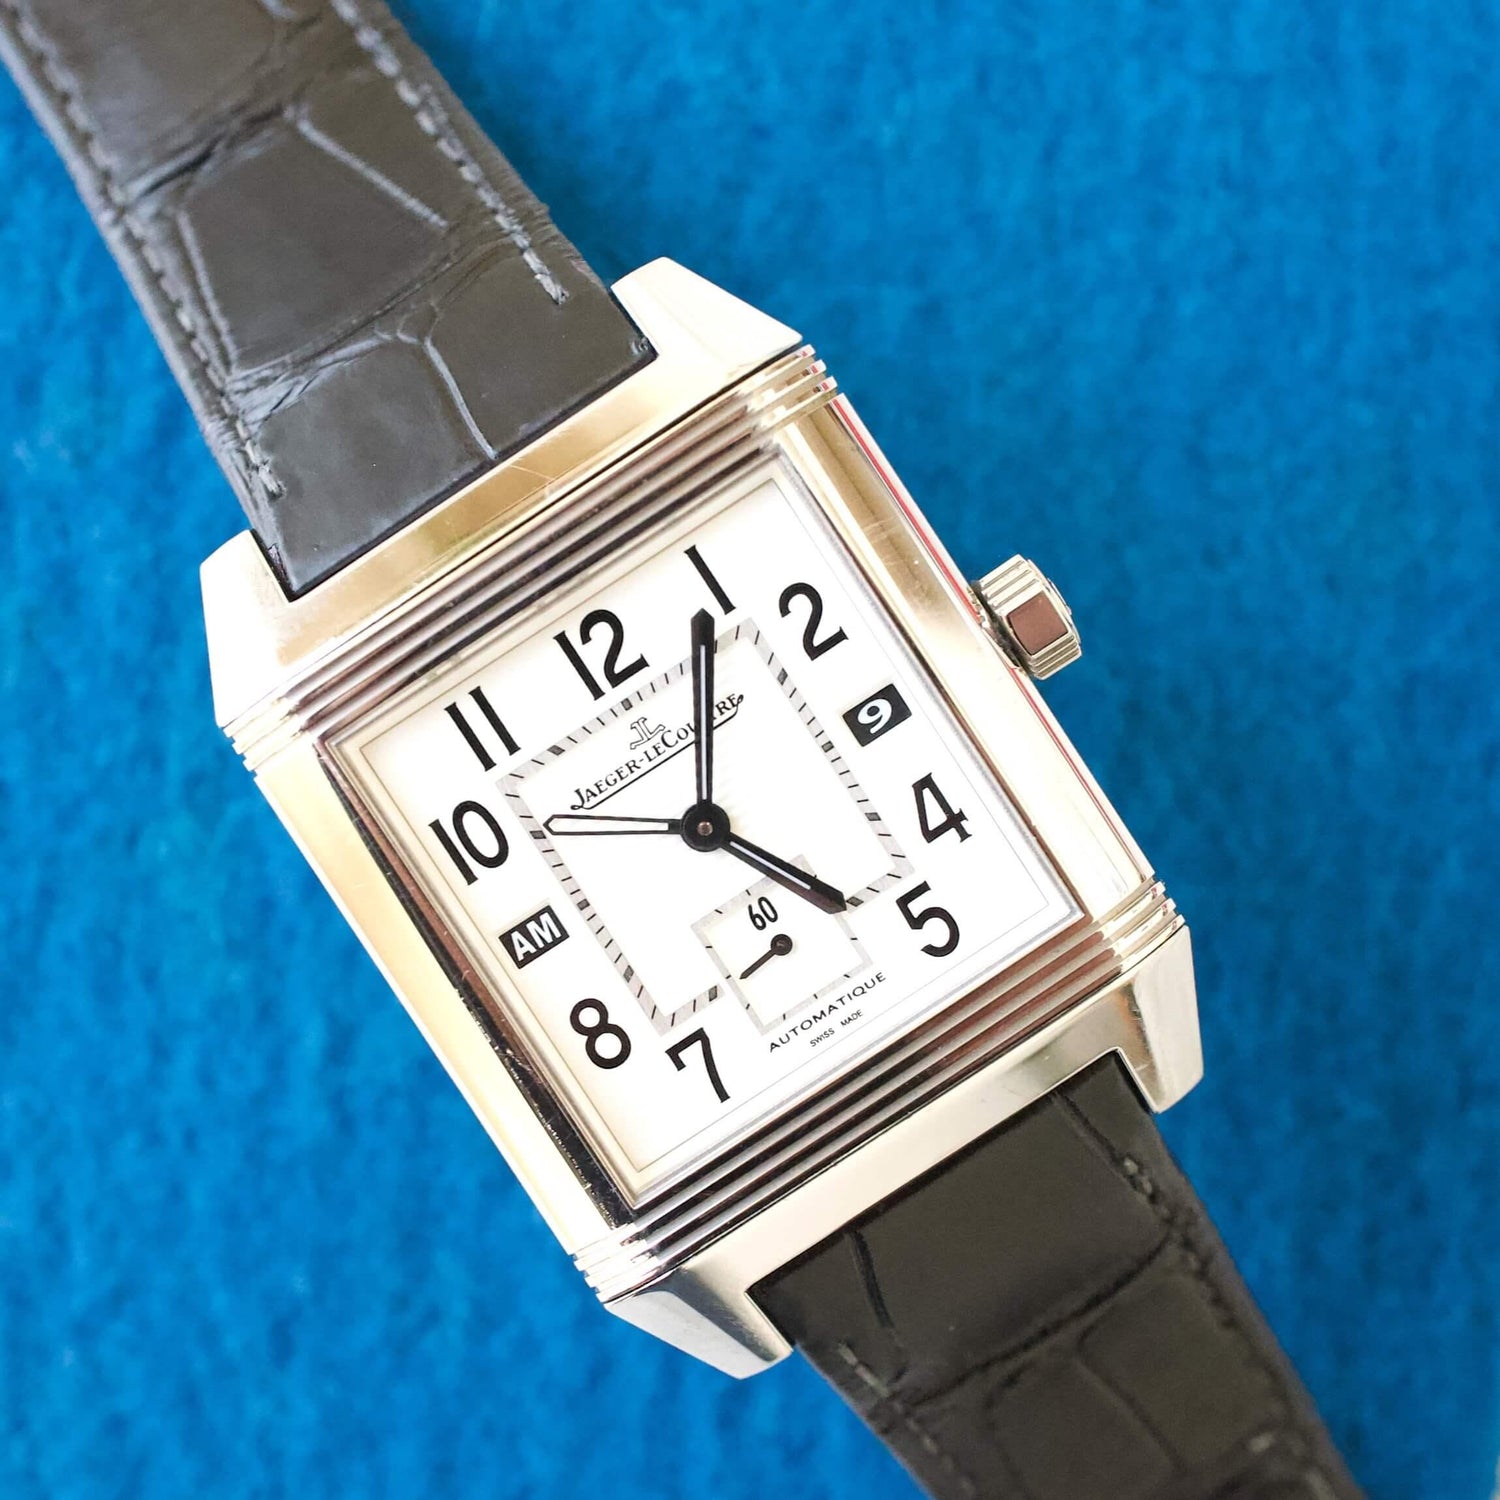 JAEGER LECOULTRE Reverso Sqaurdro 230.8.77 Q7008420 GMT 50x35 MM Service Box, Paper and Orginal Purchase Receipt (Serviced by JLC 2021 Original Retail Price $16800)